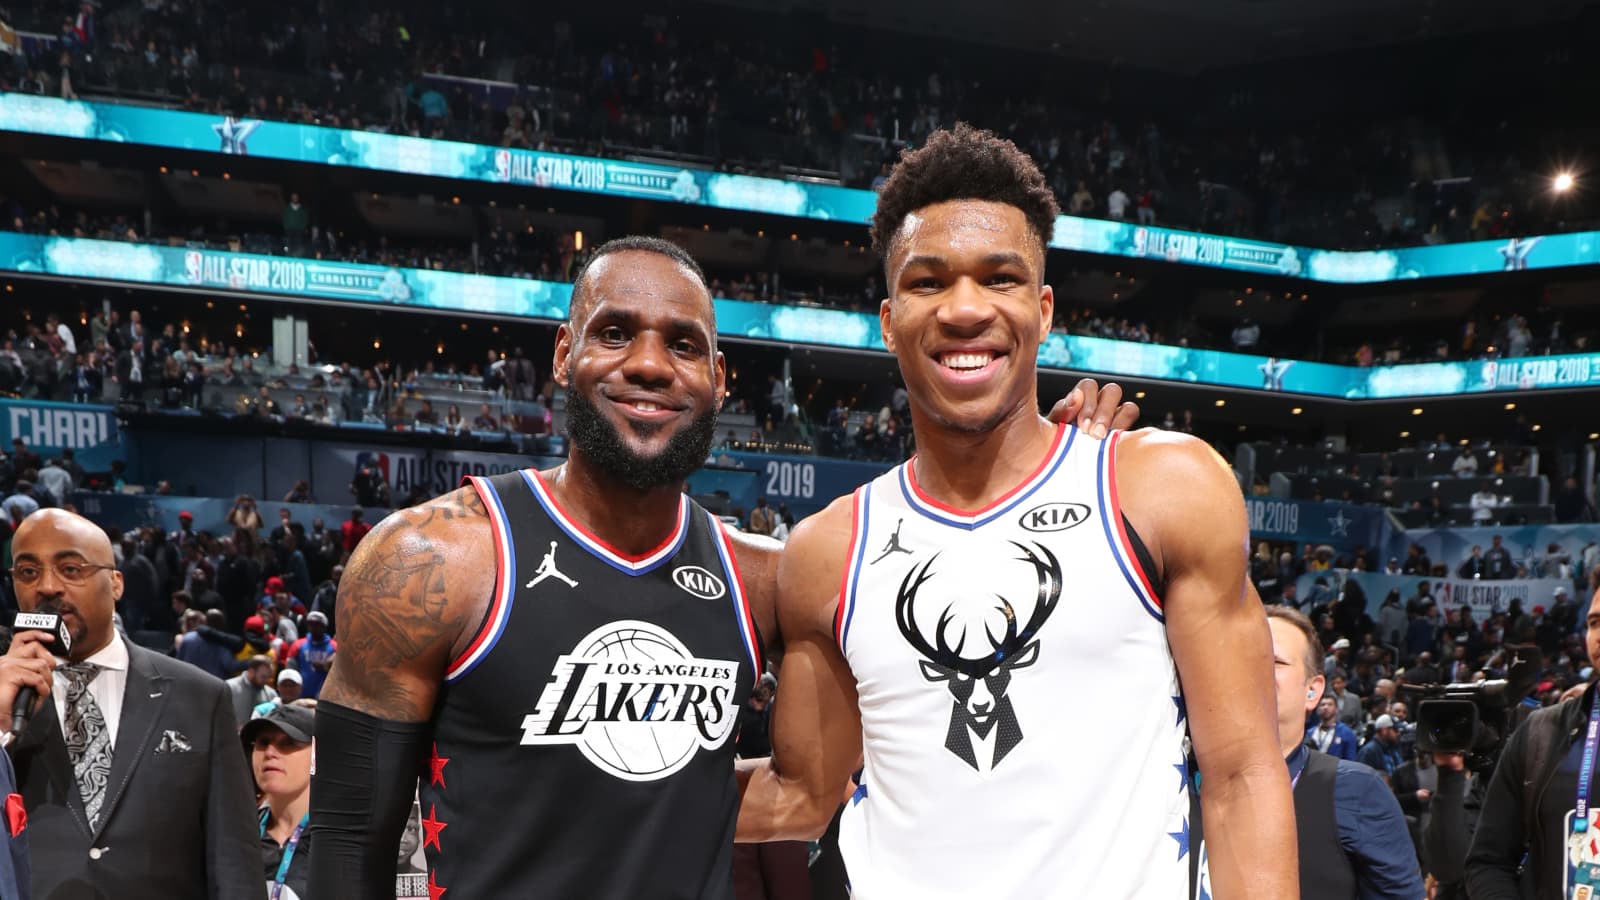 NBA All Star Game 2020: How Much Money The Winning Team Earns